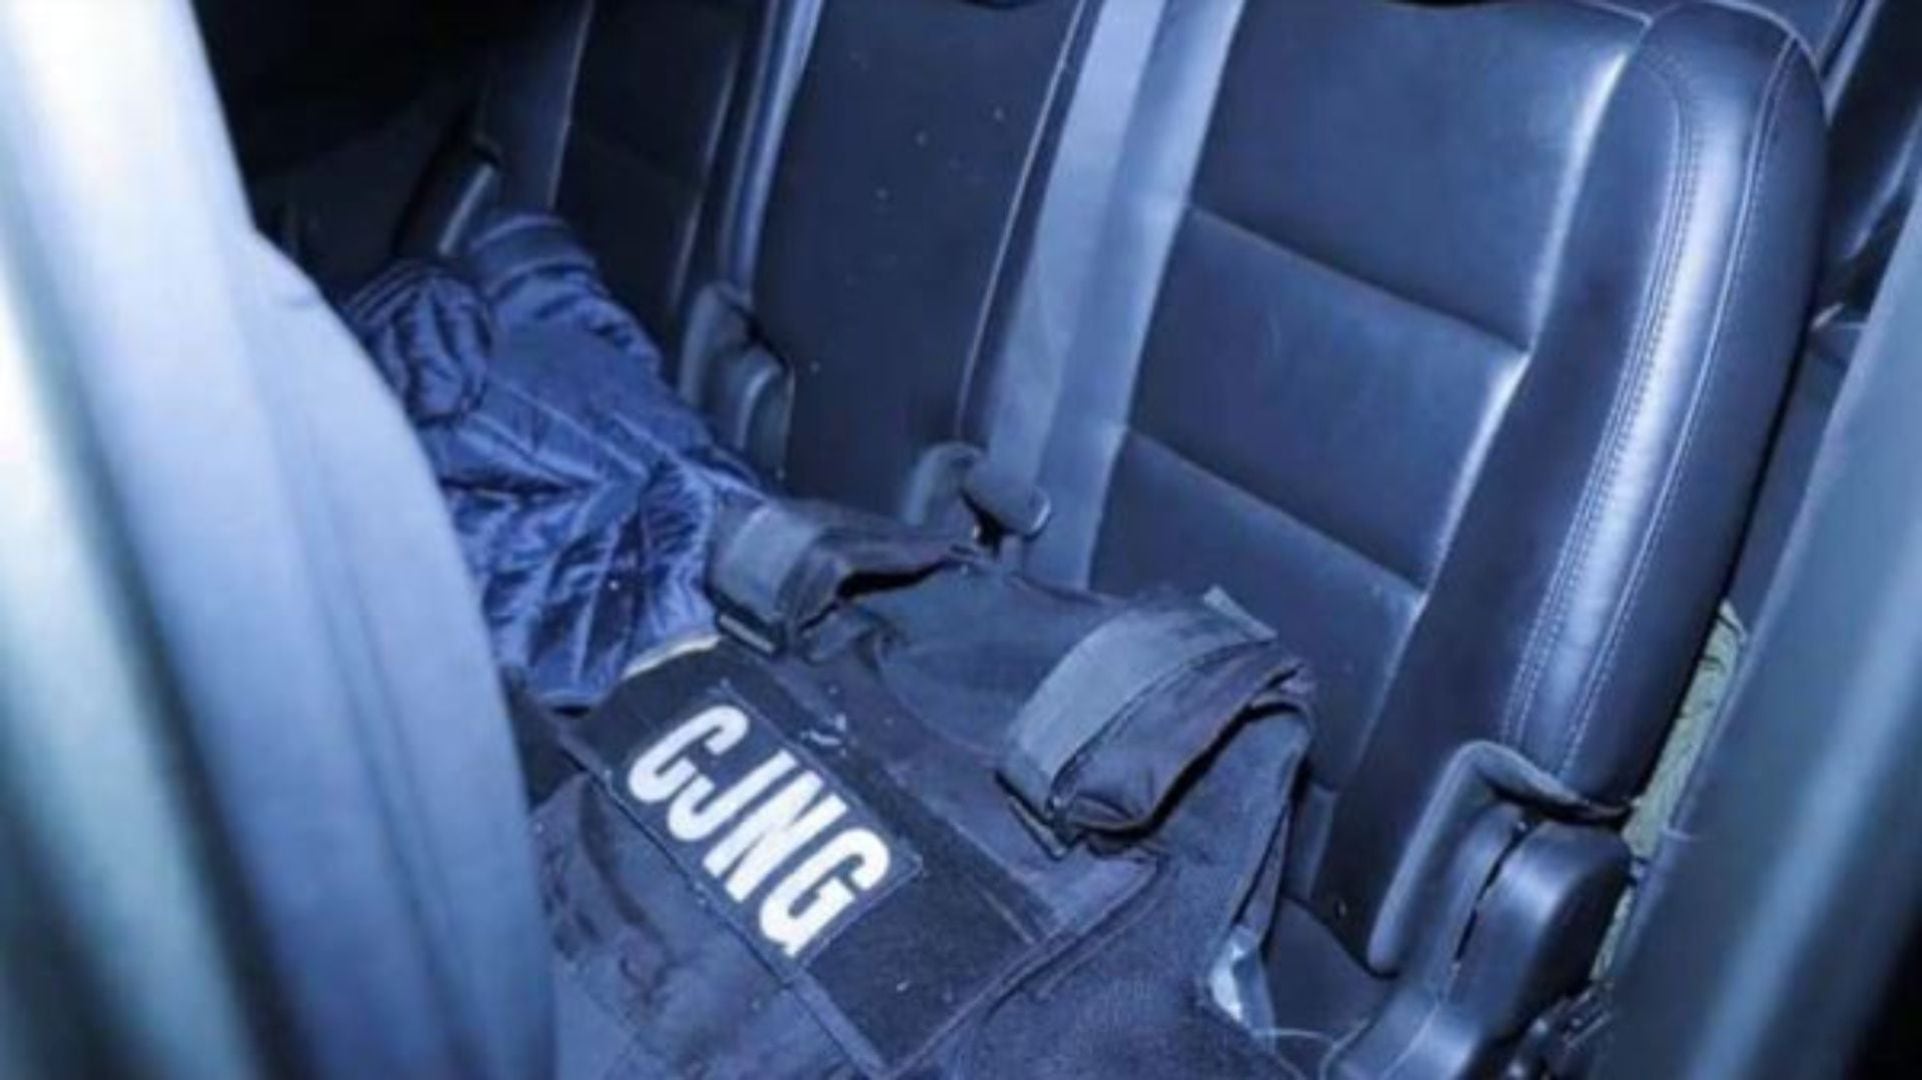 The CJNG and the Sinalo Cartel operate in Puebla, according to leaked military reports (Photo: File)